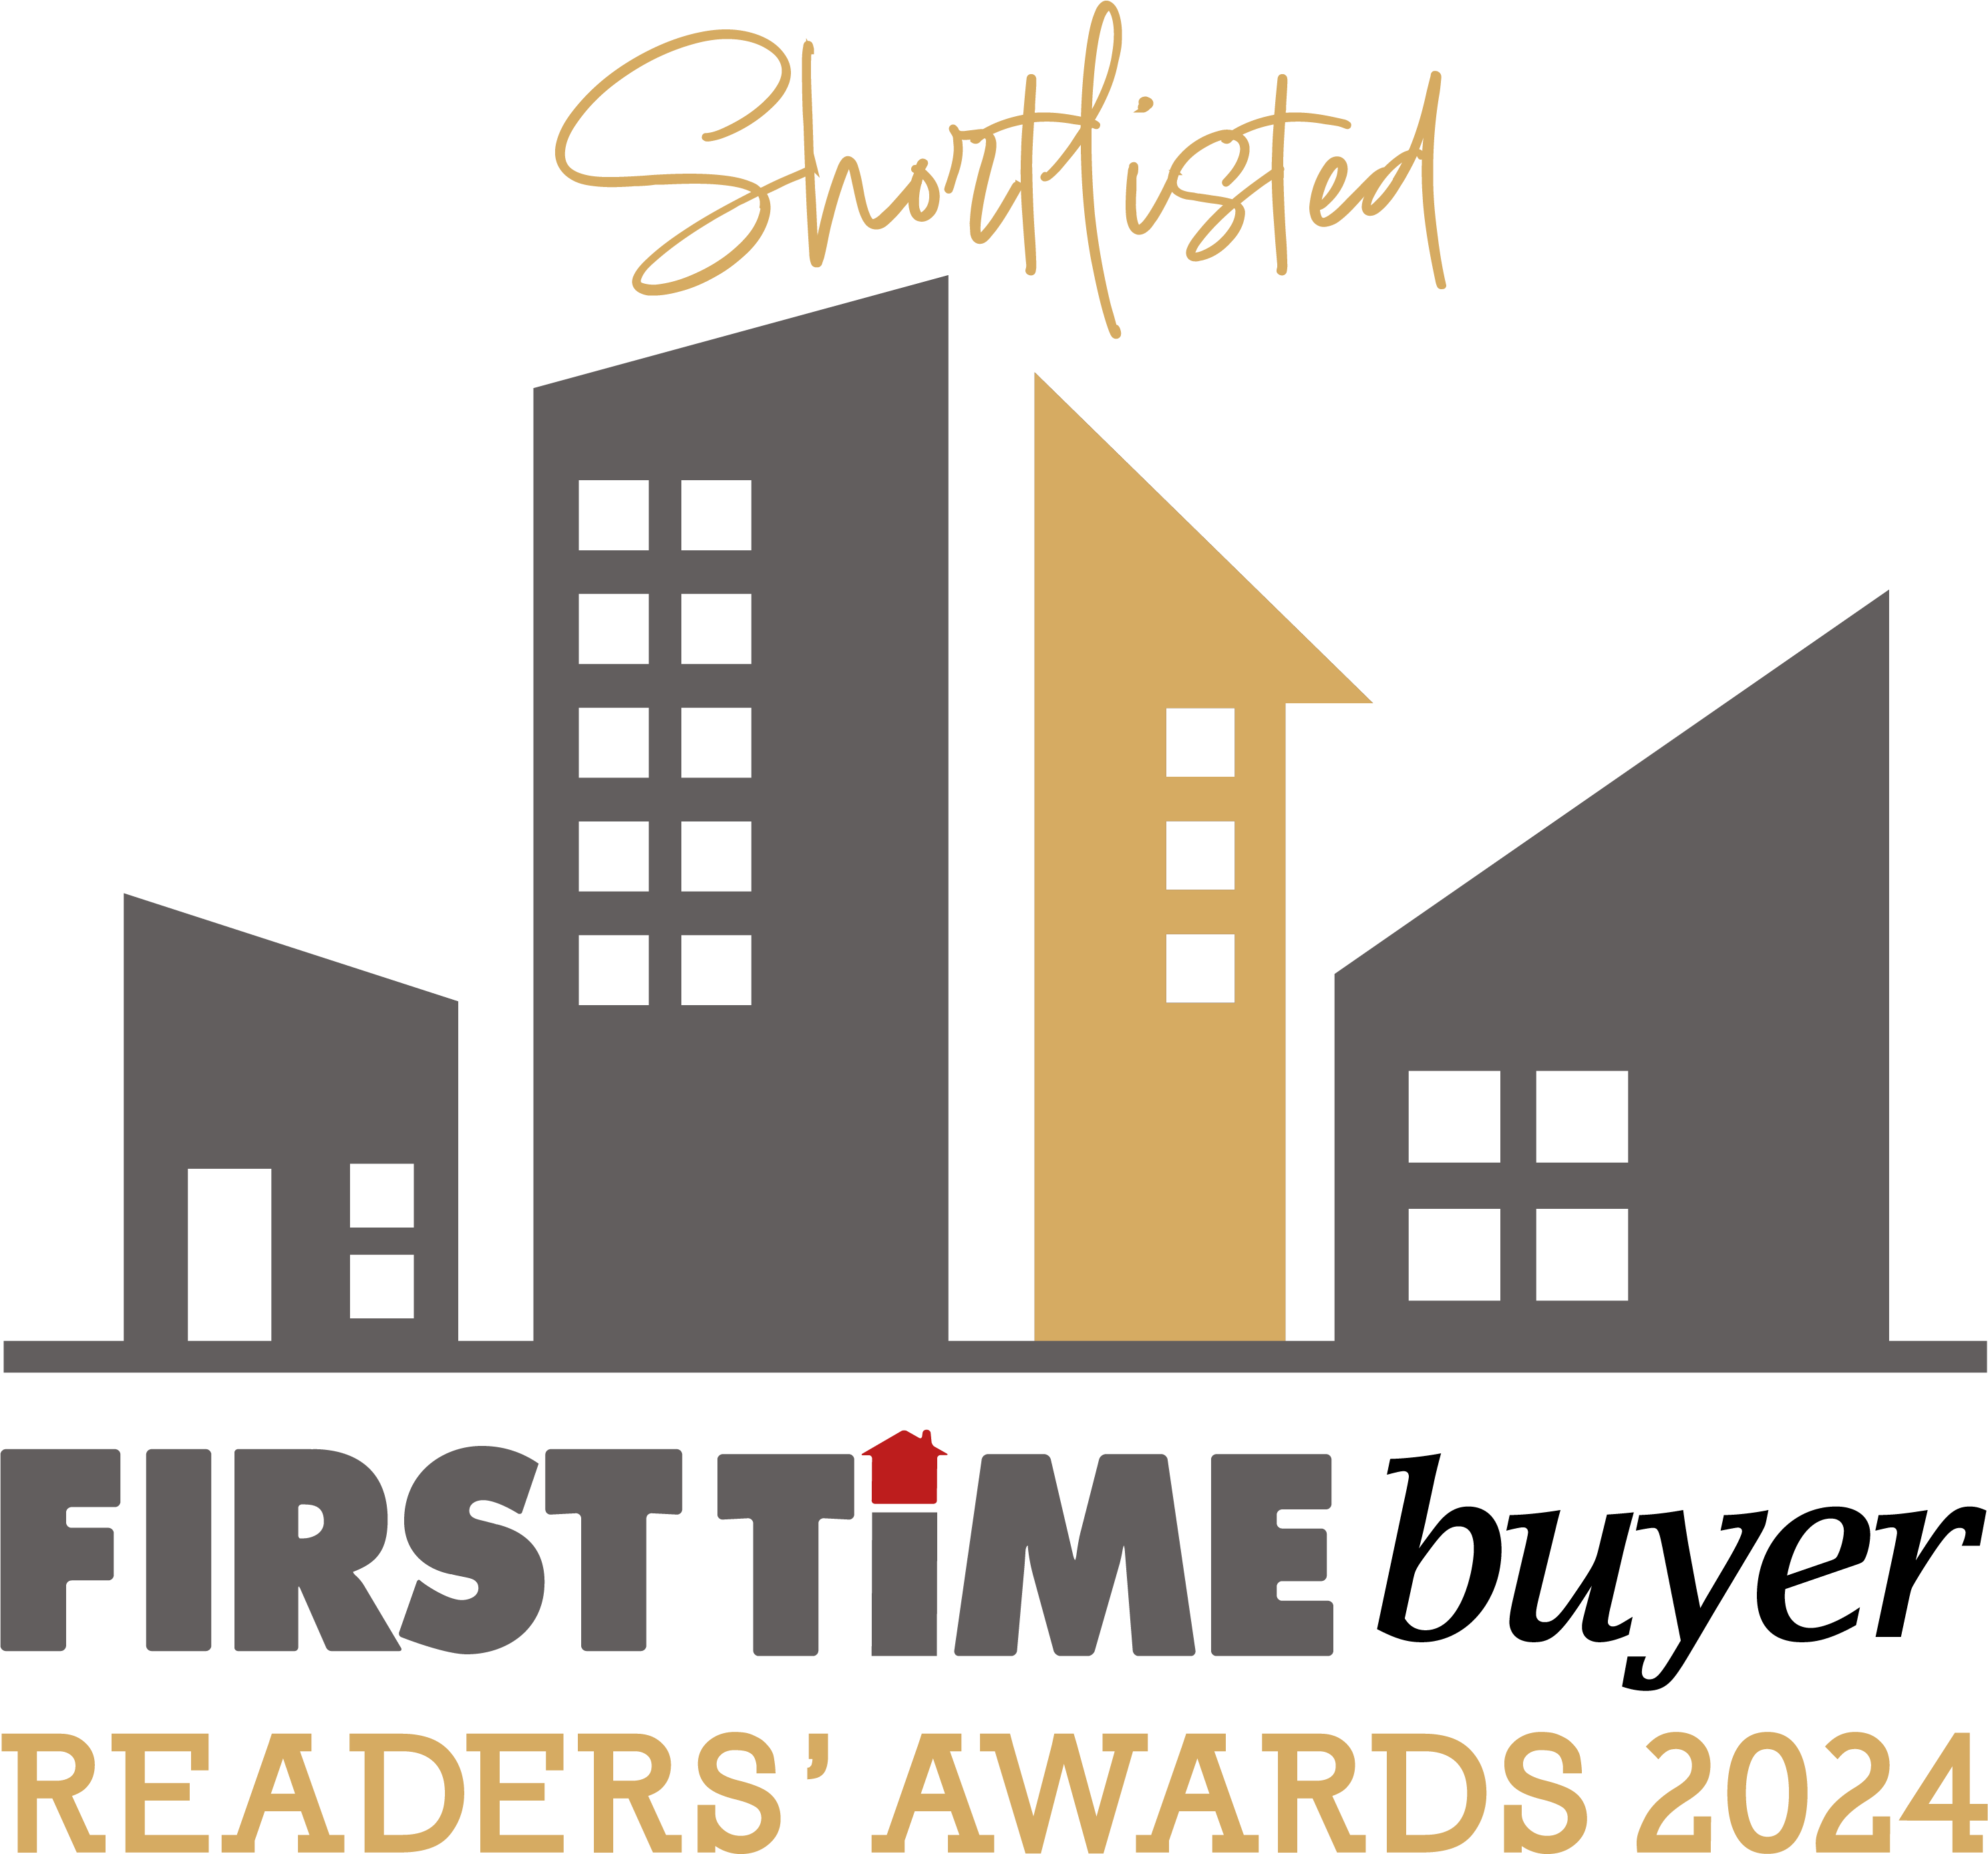 We have been shortlisted for First Time Buyer Readers’ Awards 2024